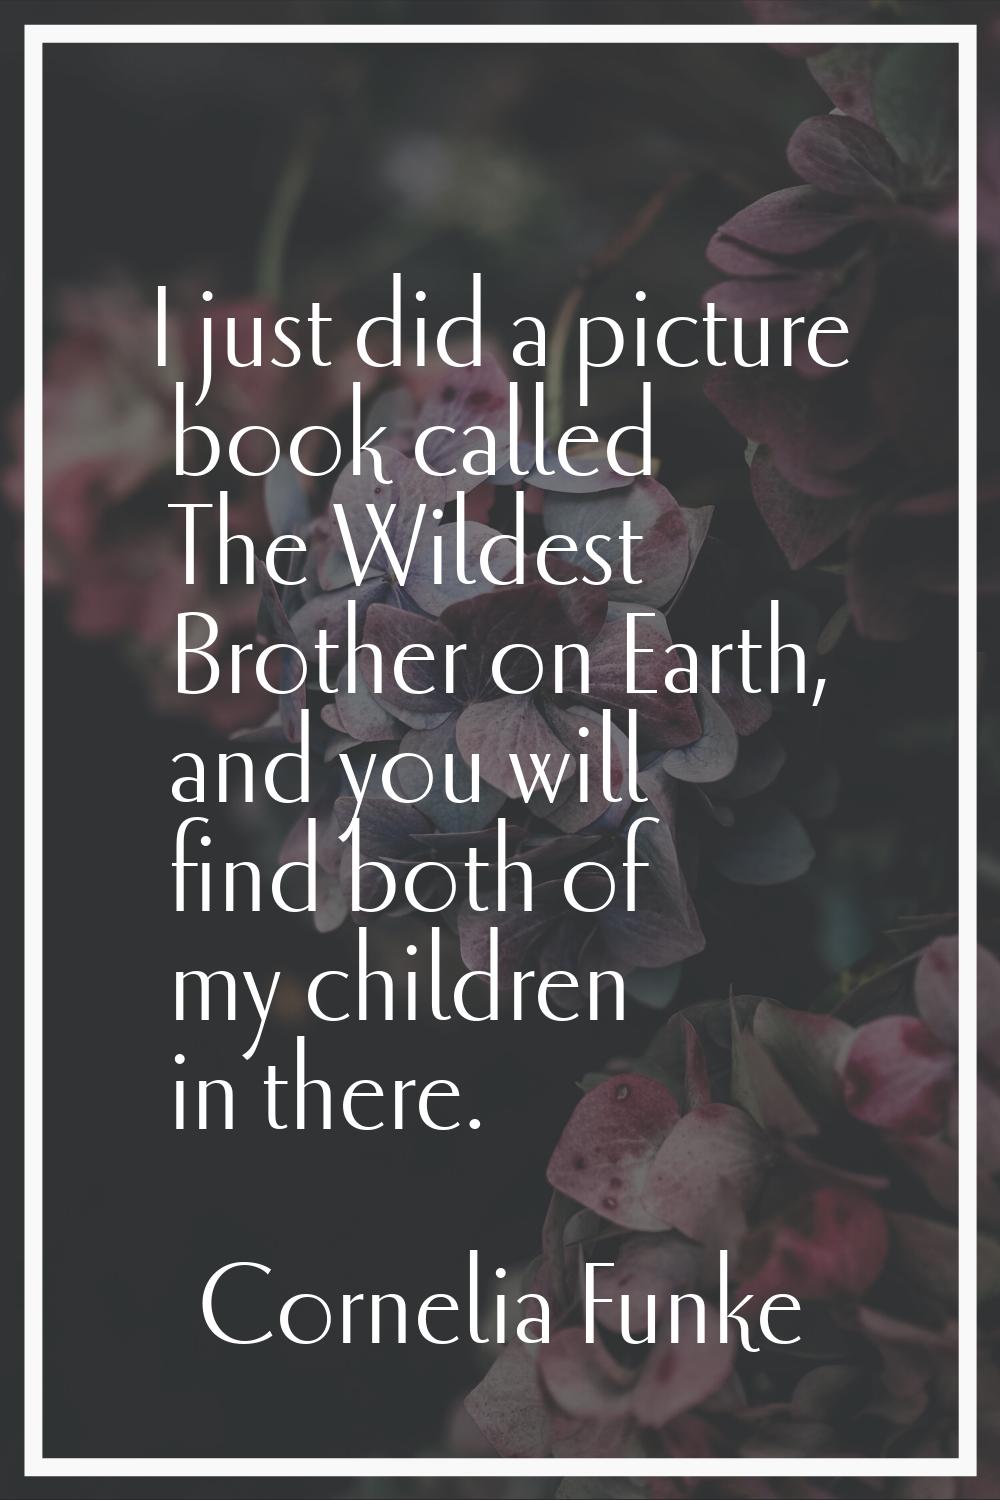 I just did a picture book called The Wildest Brother on Earth, and you will find both of my childre